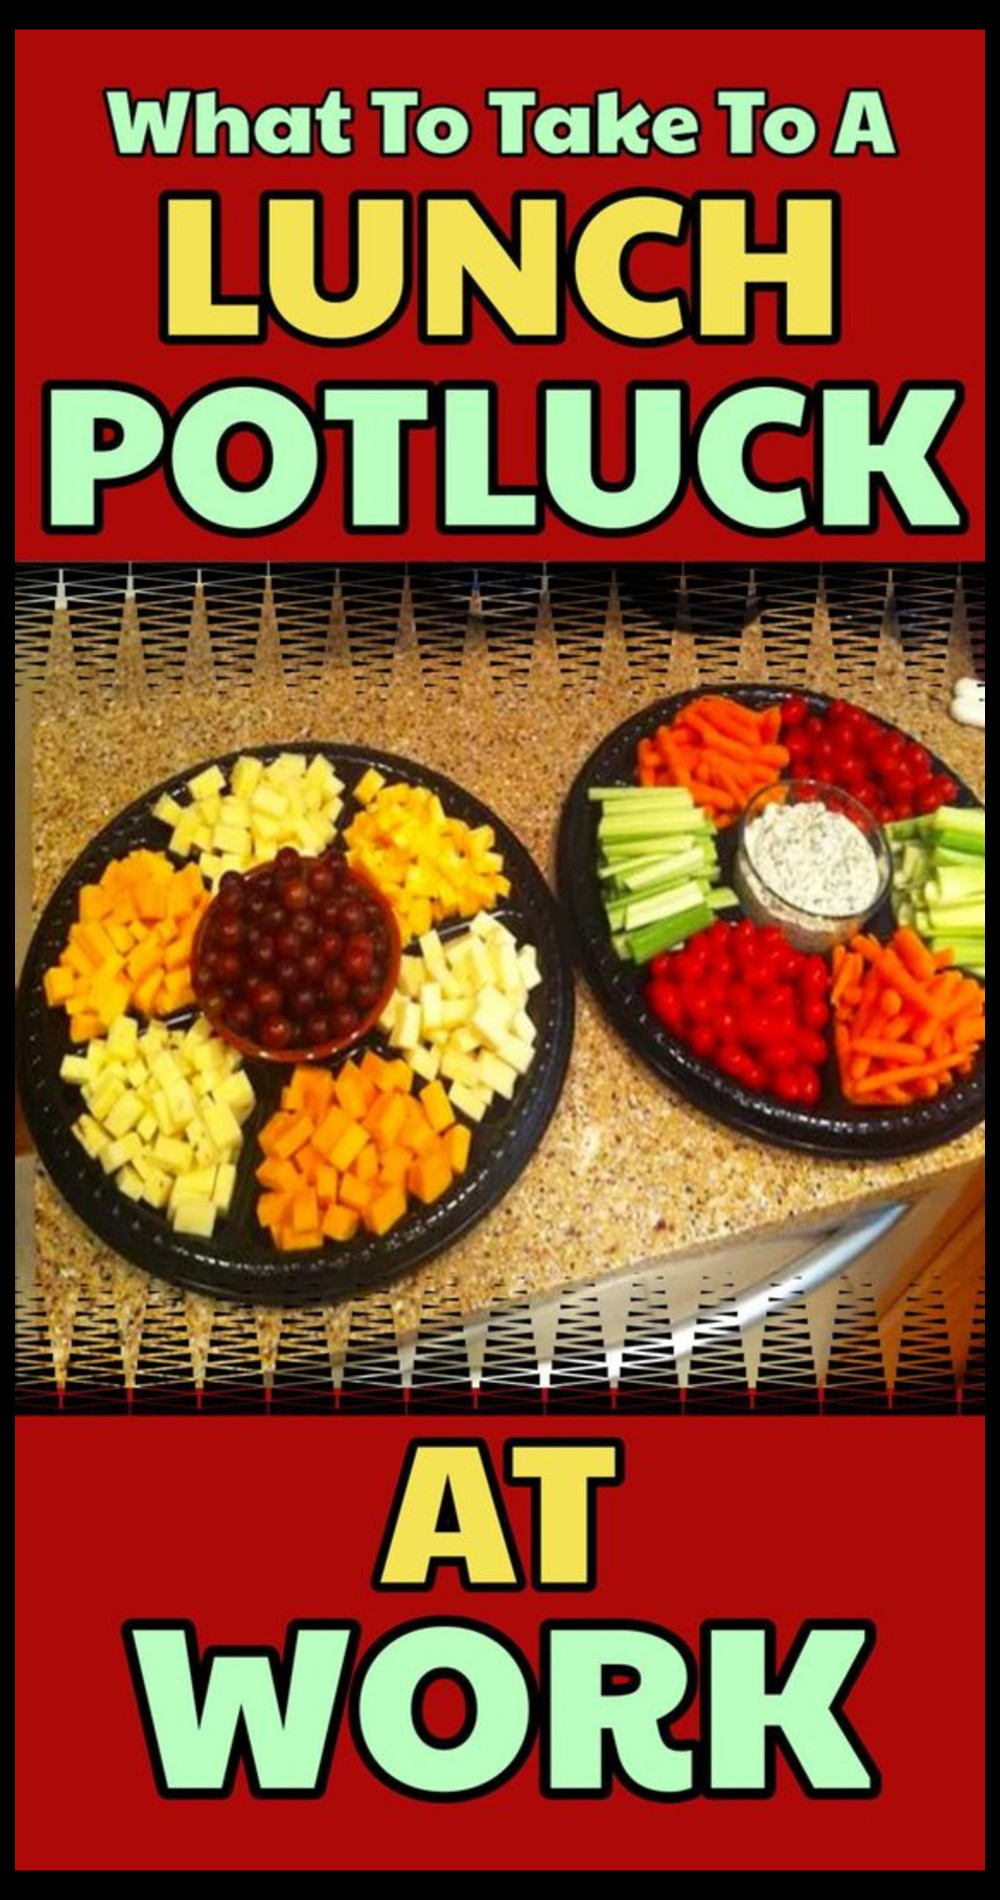 Potluck Dishes and Food Ideas - What To Take To a Lunch Potluck At Work